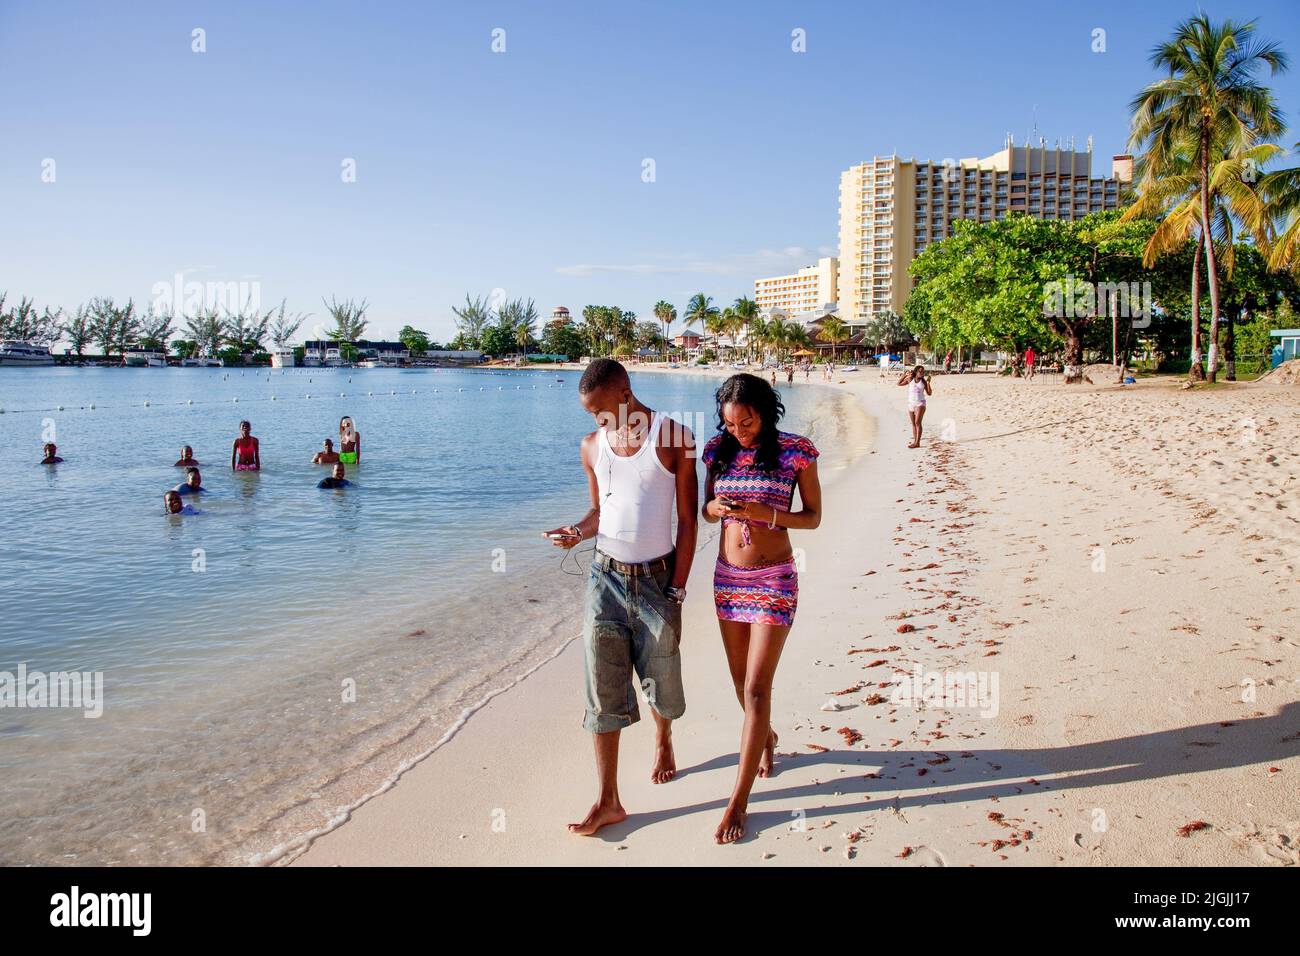 Jamaica, one of the beaches in the northern town Ocho Rios. Stock Photo